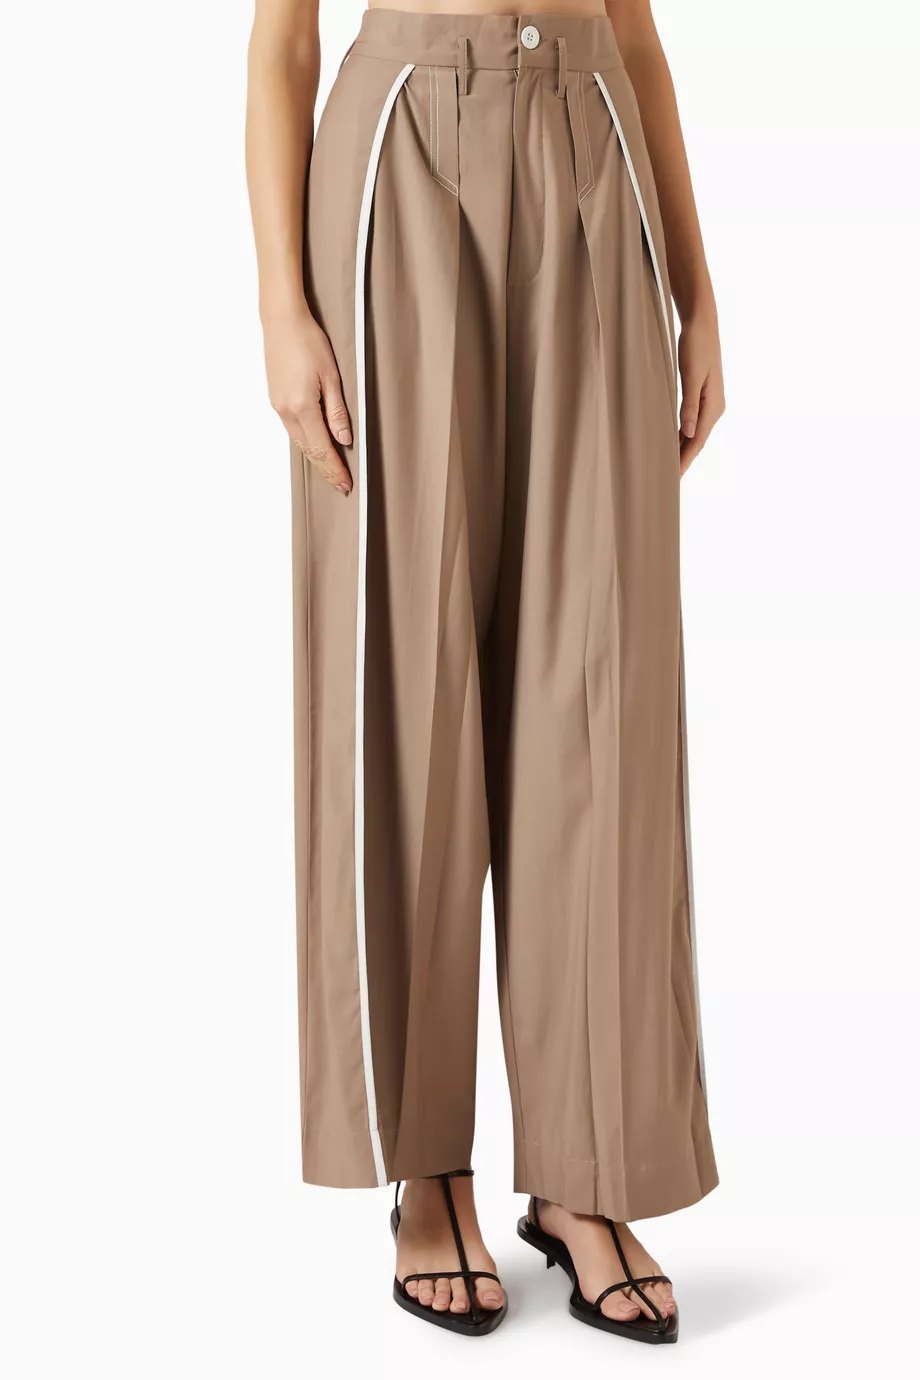 Buy Lovebirds Neutral Loose-fit Pants in Terry-rayon for Women in Saudi